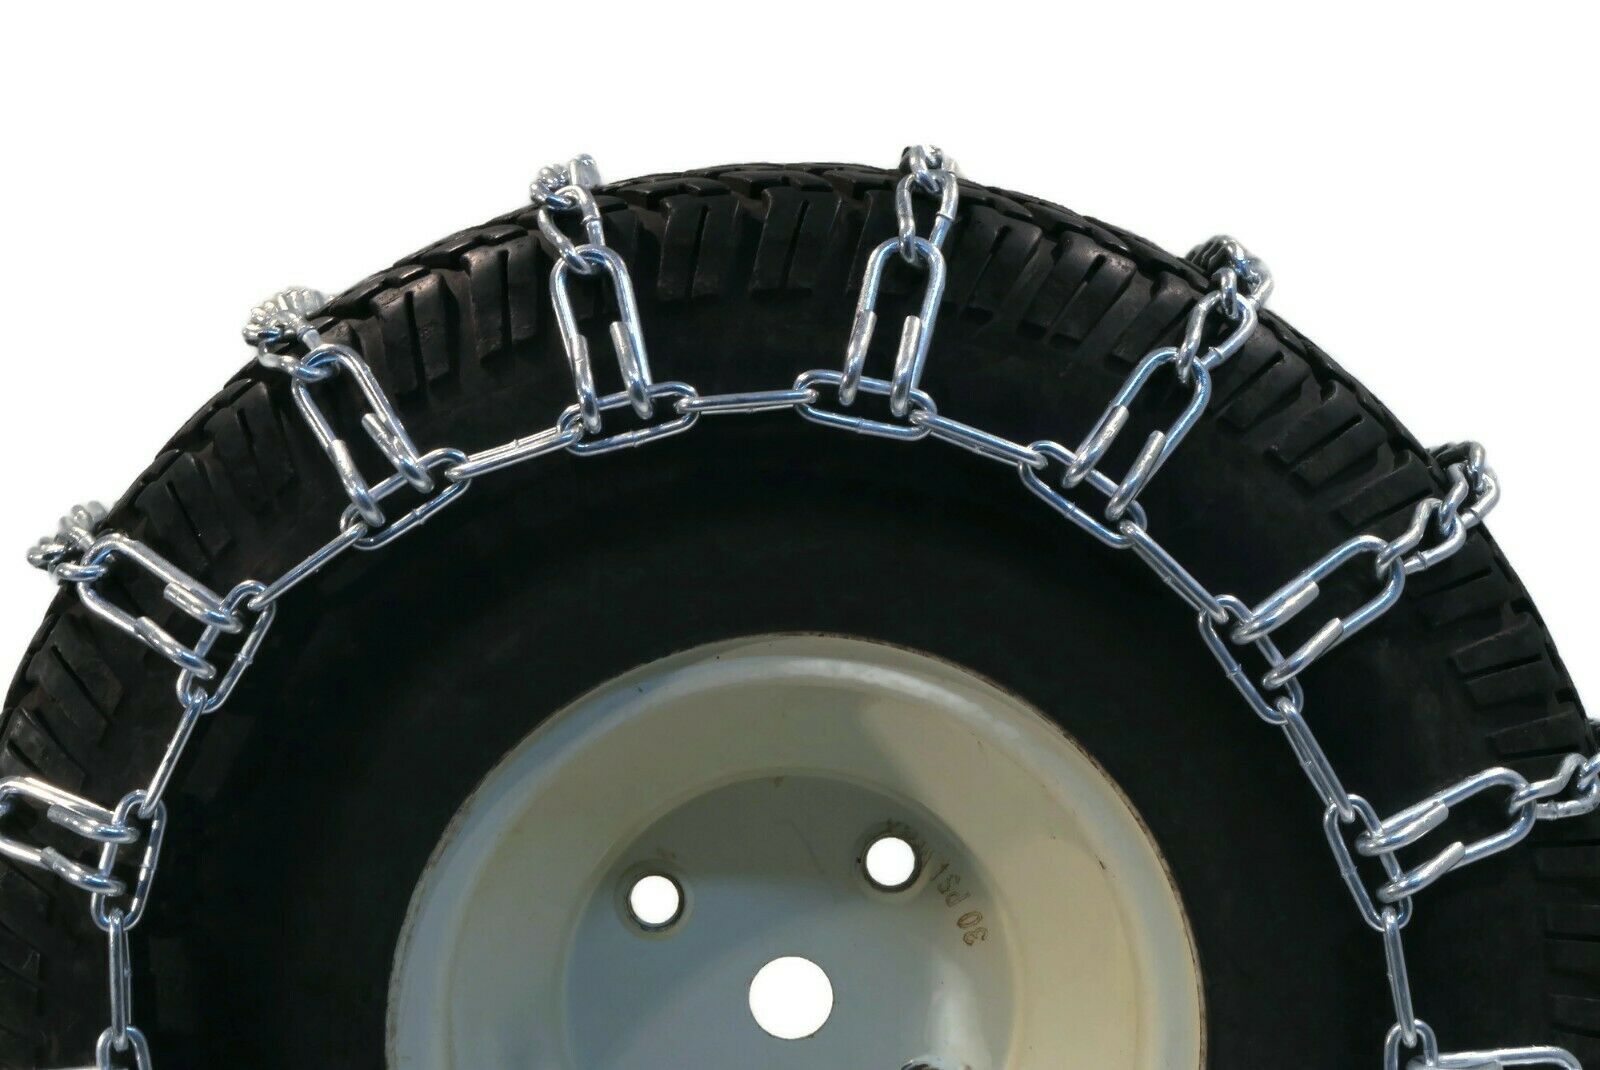 The ROP Shop | Pair 2 Link Tire Chains 15x6.00x6 For Toro Wheel Horse Lawn Mower Tractor Rider - image 3 of 6